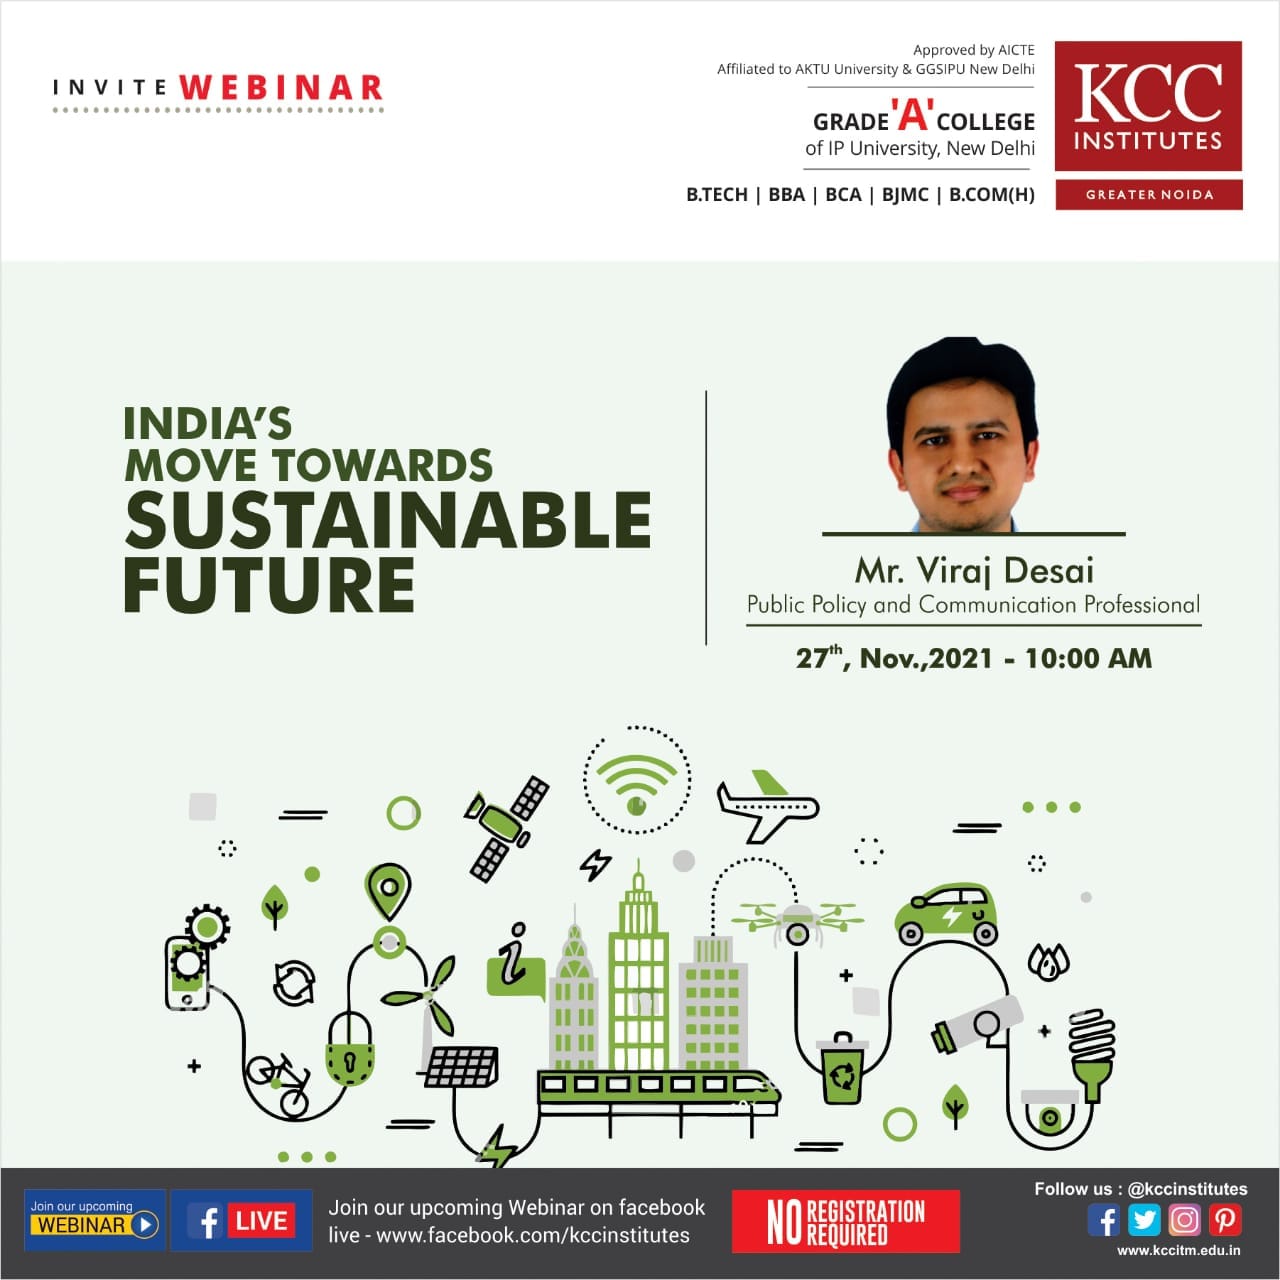 Mr. Viraj Desai, Public Policy and Communication Professional for a webinar on "India’s Move Towards Sustainable Future" Mr. Viraj Desai, Public Policy and Communication Professional for a webinar on India’s Move Towards Sustainable Future.